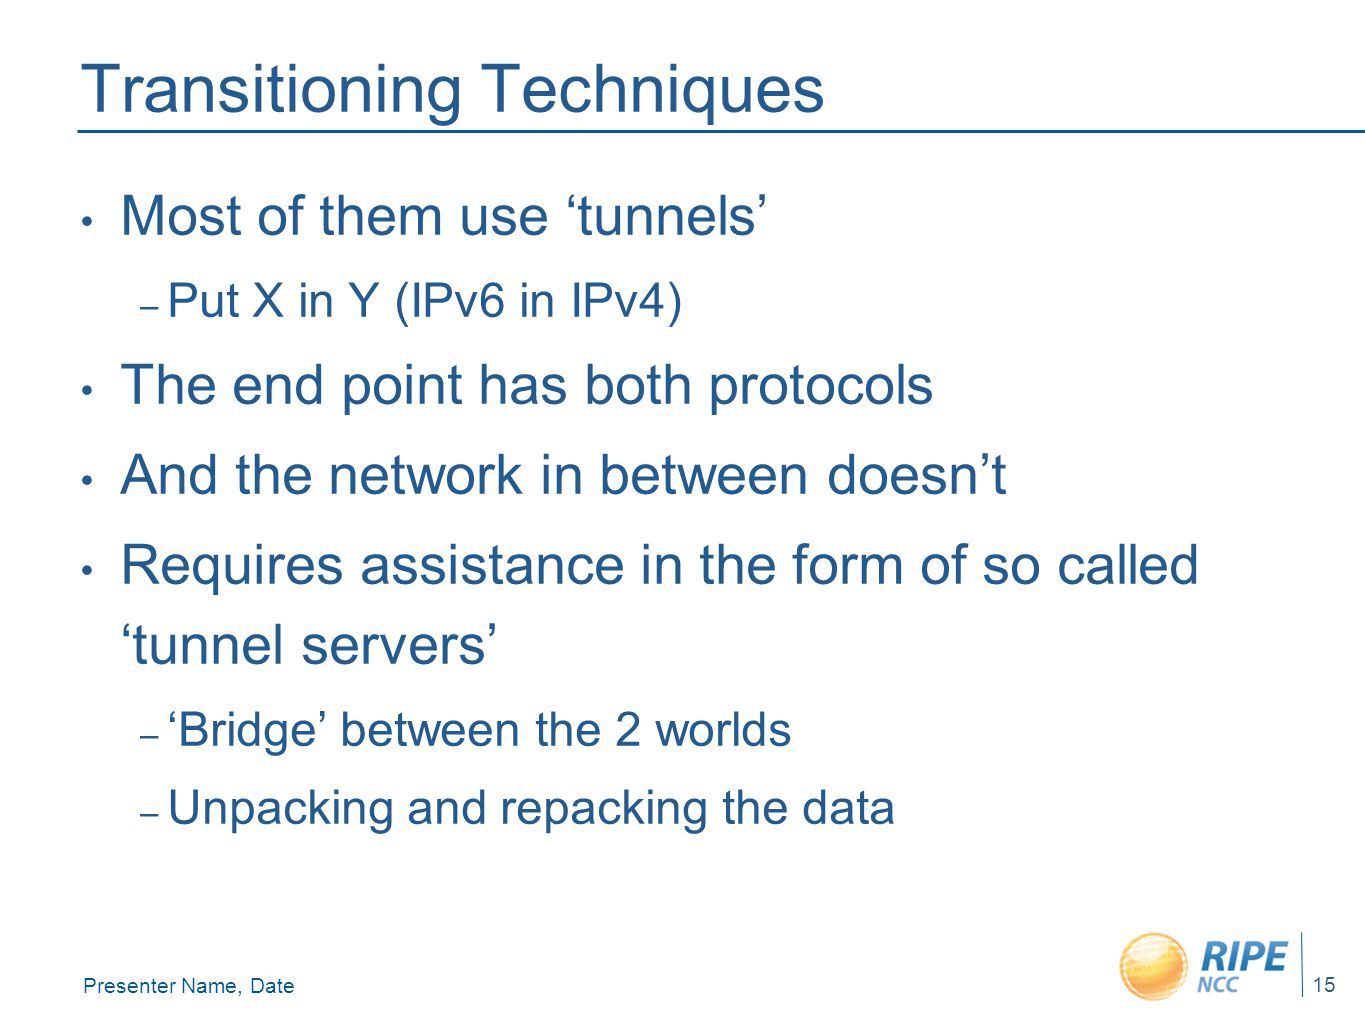 Presenter Name, Date 15 Transitioning Techniques Most of them use ‘tunnels’ – Put X in Y (IPv6 in IPv4) The end point has both protocols And the network in between doesn’t Requires assistance in the form of so called ‘tunnel servers’ – ‘Bridge’ between the 2 worlds – Unpacking and repacking the data